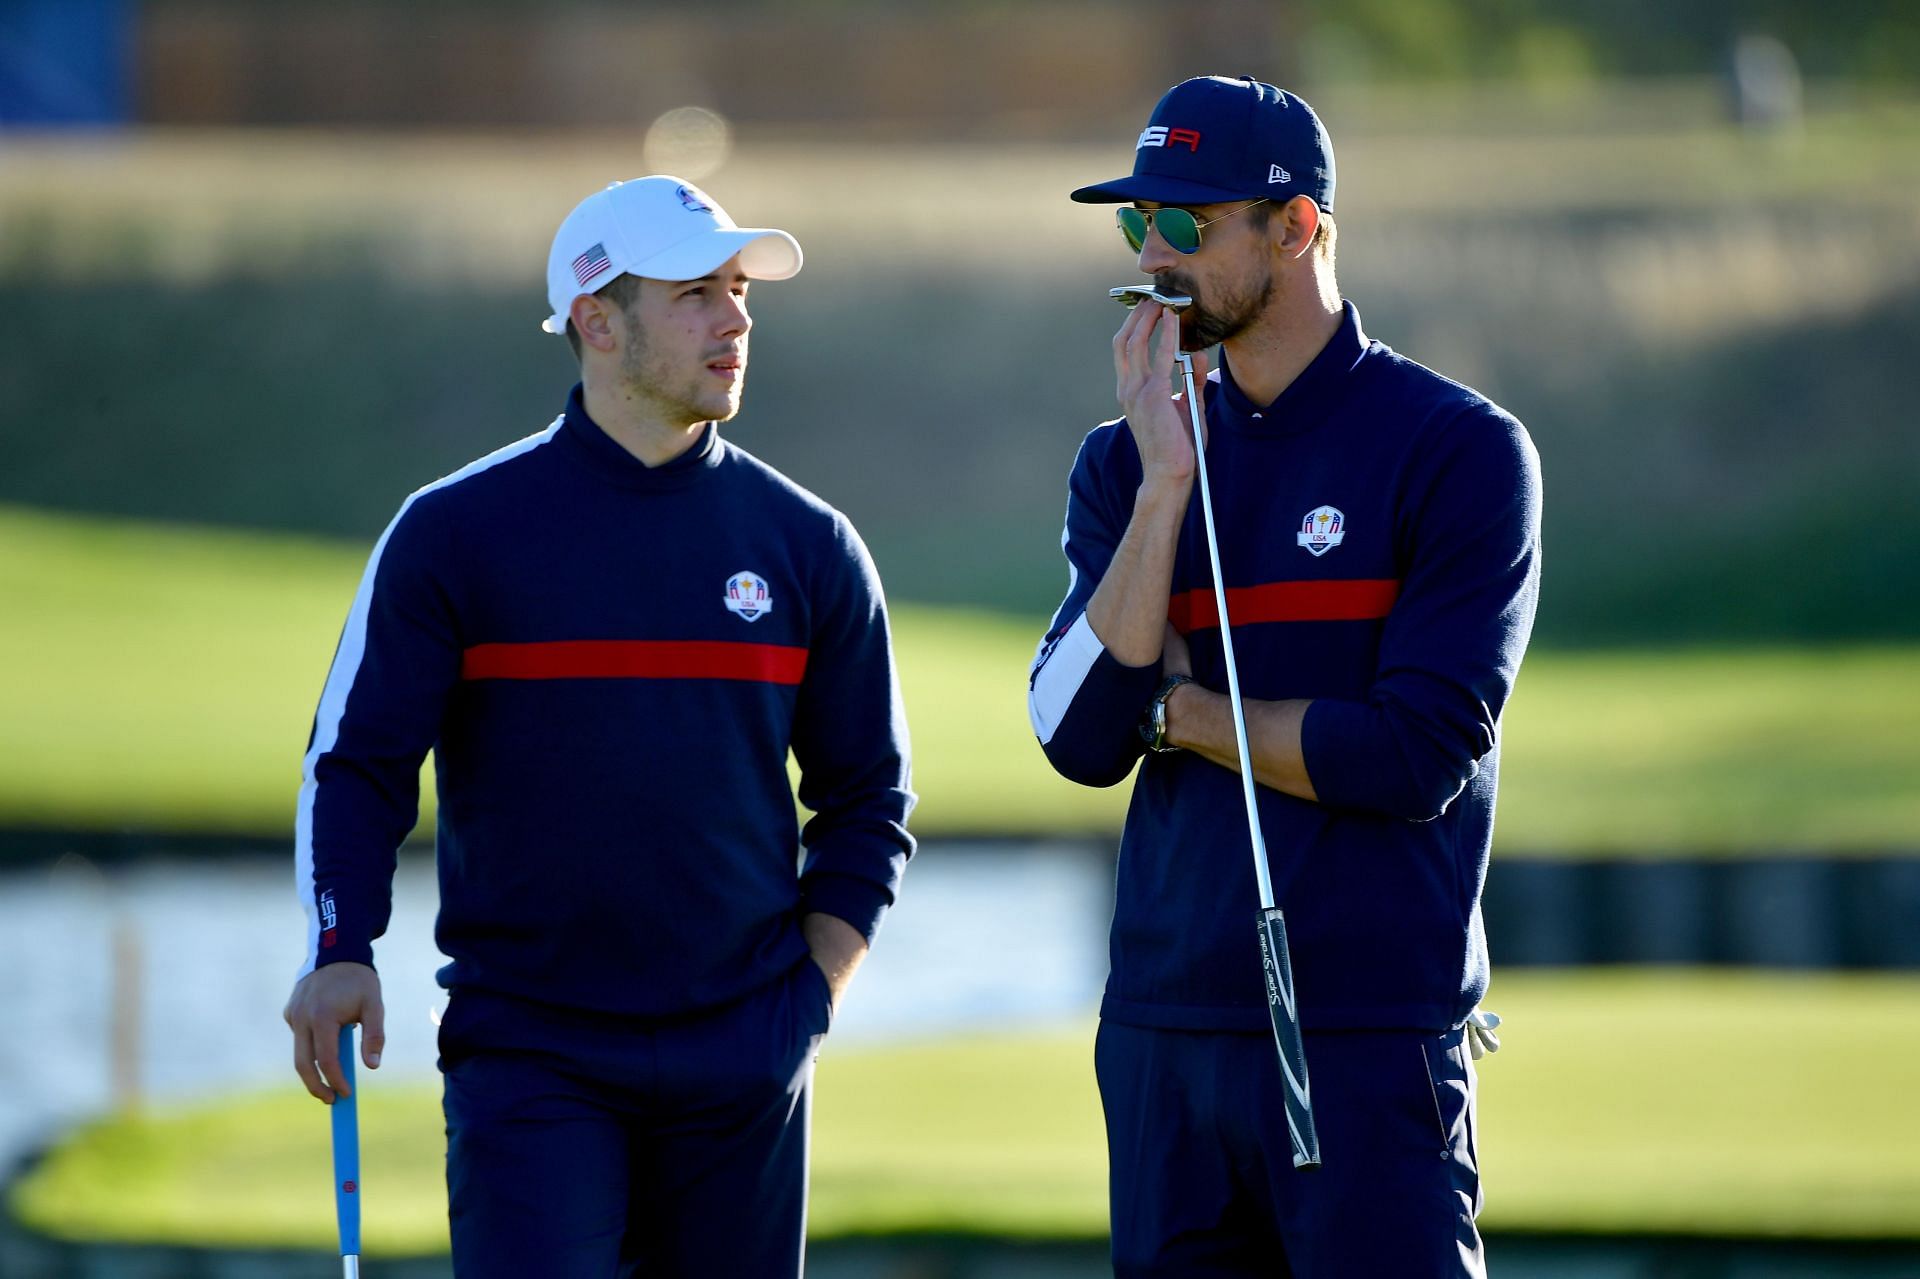 Michael Phelps and Nick Jonas at Ryder Cup (Image via Stuart Franklin/Getty Images)